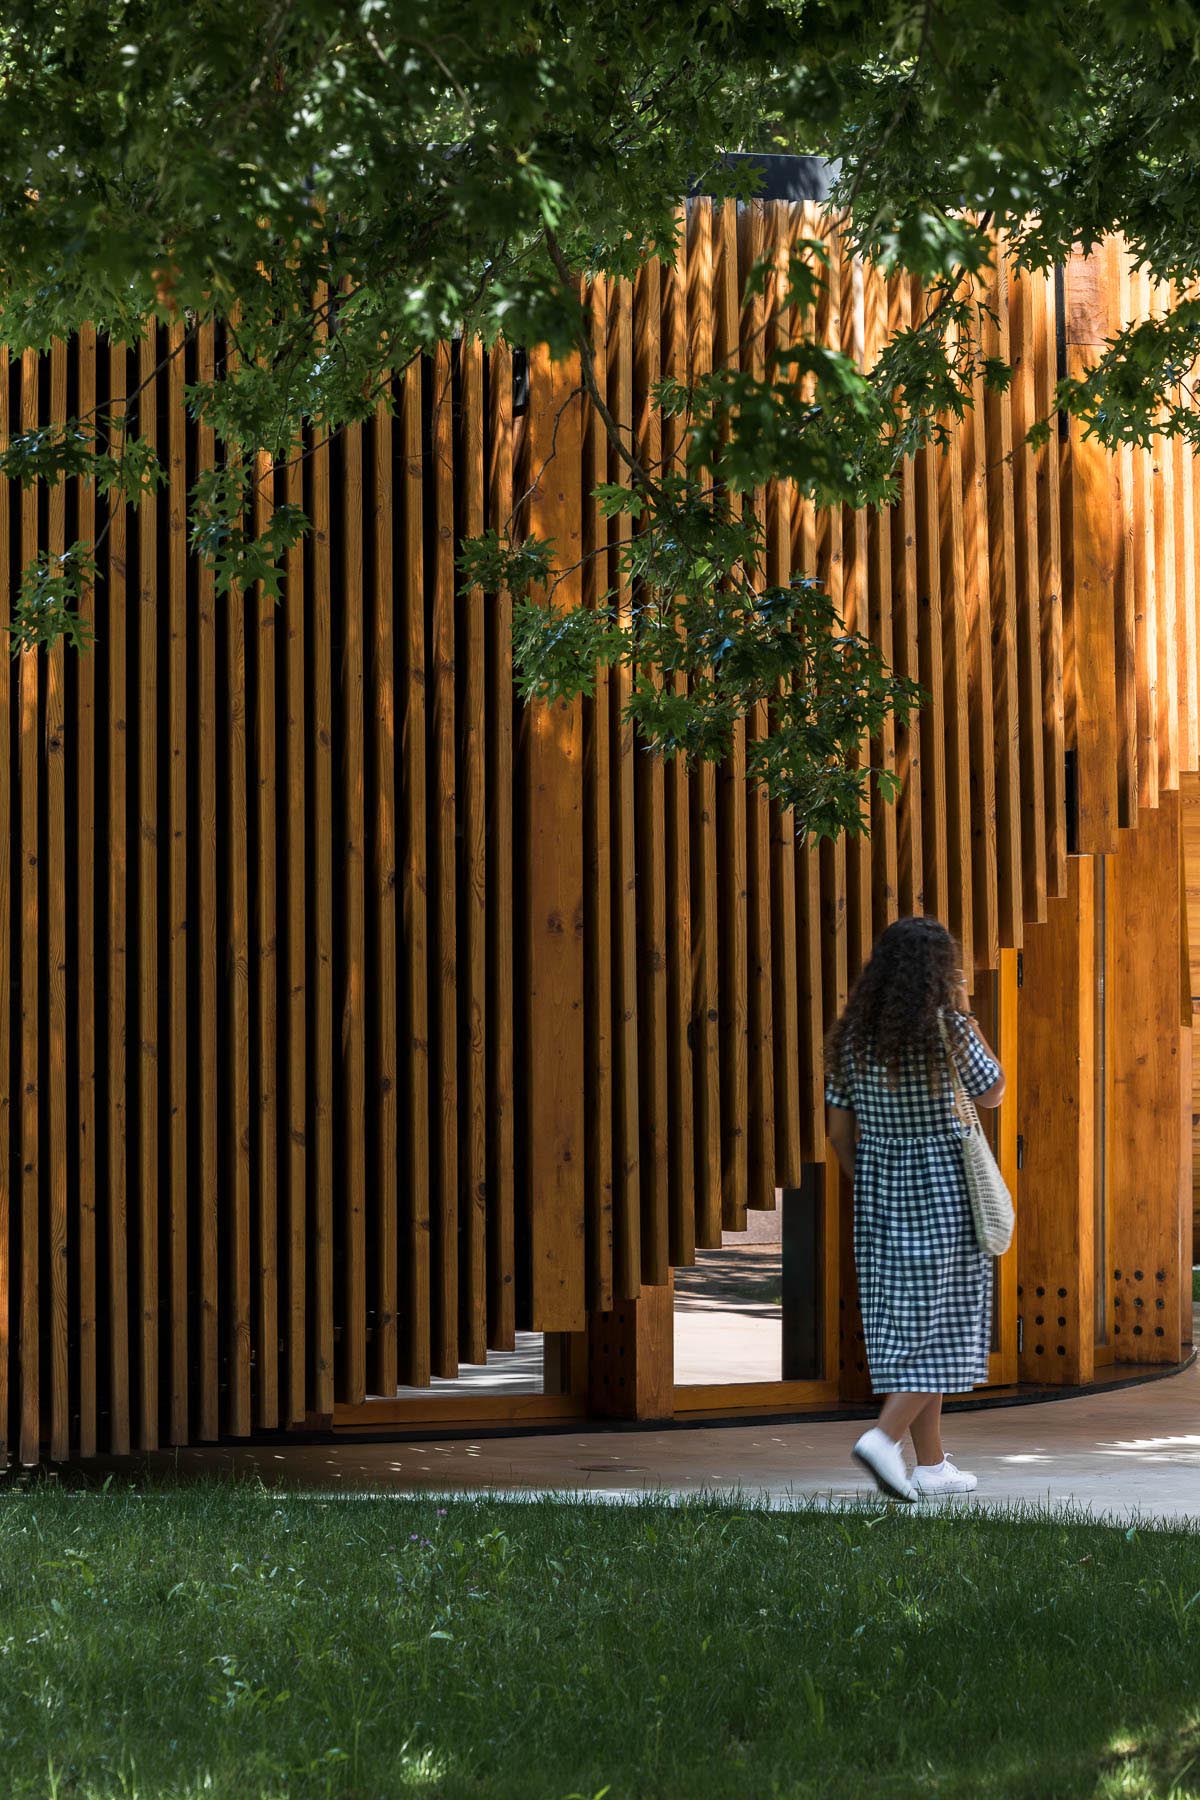 A small modern building has a circular design that's covered in vertical wood slats.